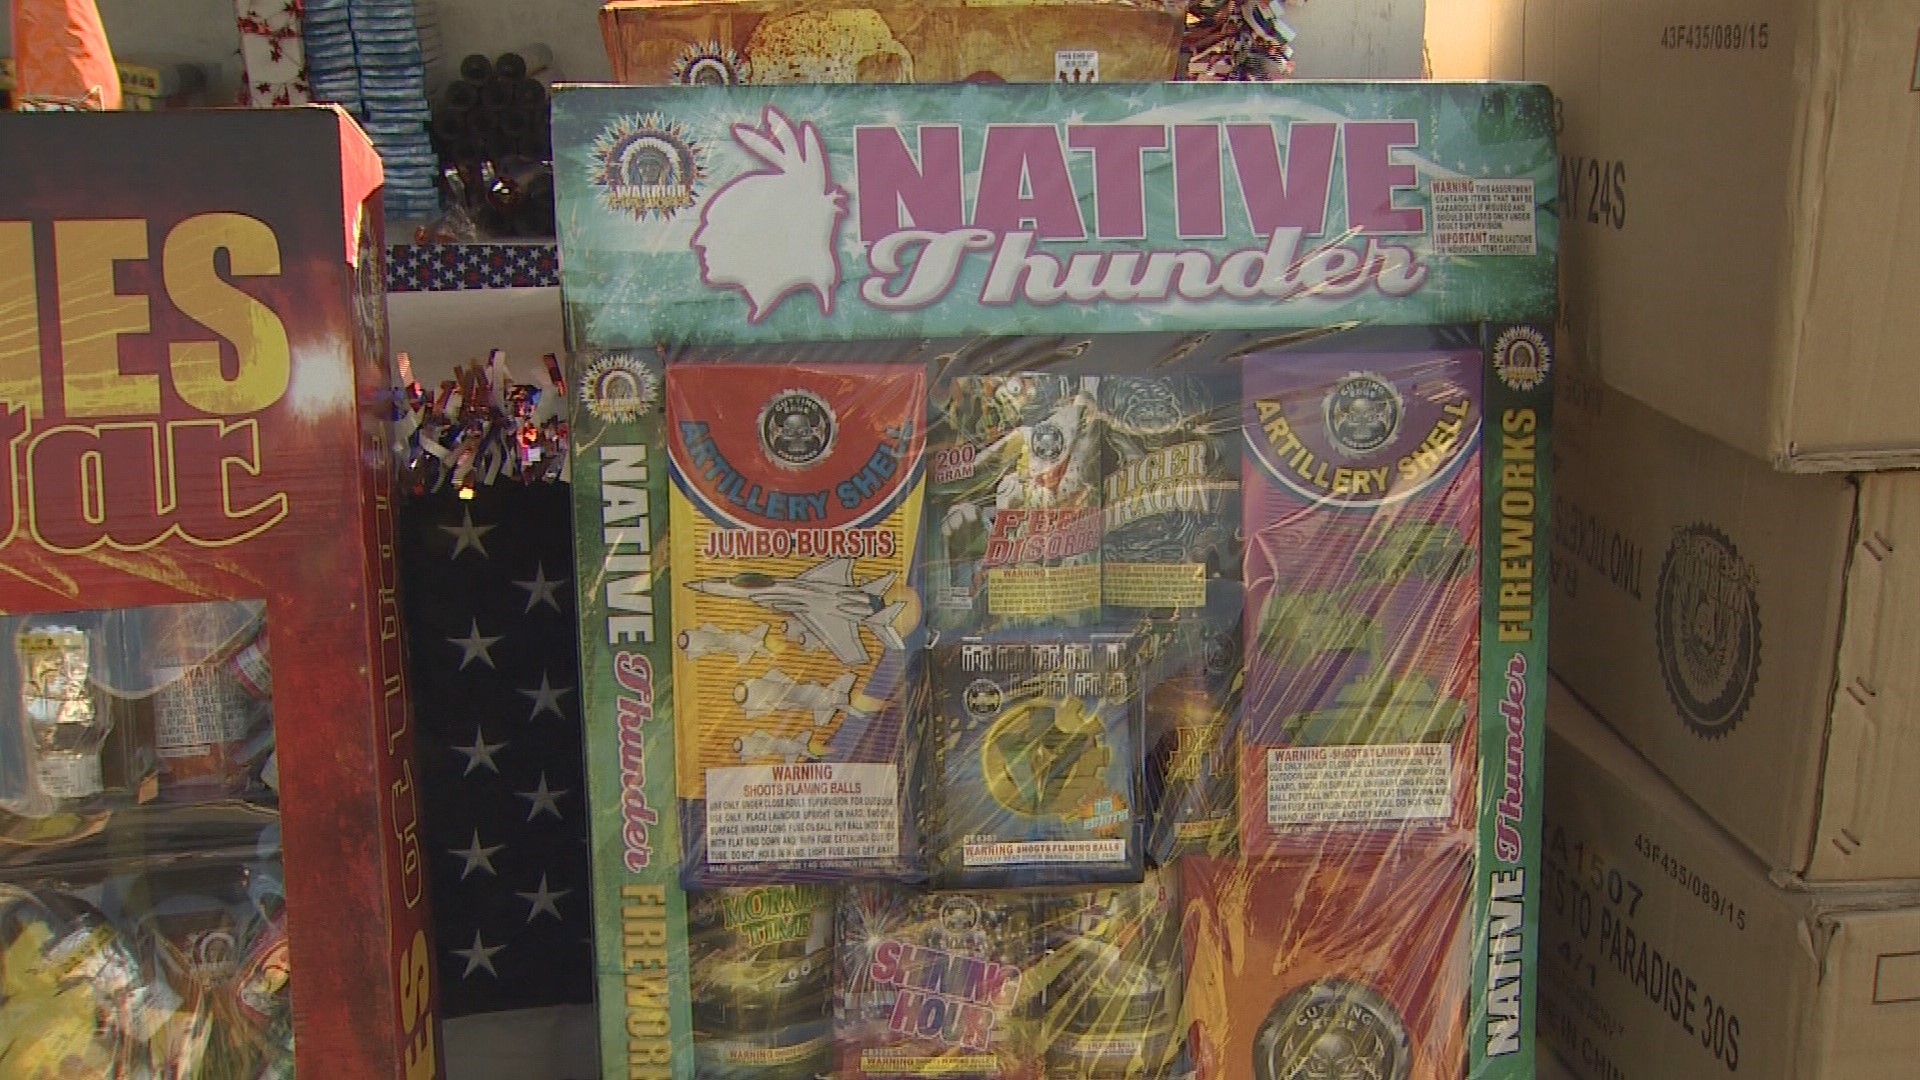 Fireworks have been illegal in Burien for a couple of decades now.  The Burien City Council finally got fed up with people breaking the law and decided to implement prohibitively expensive fines to violators.